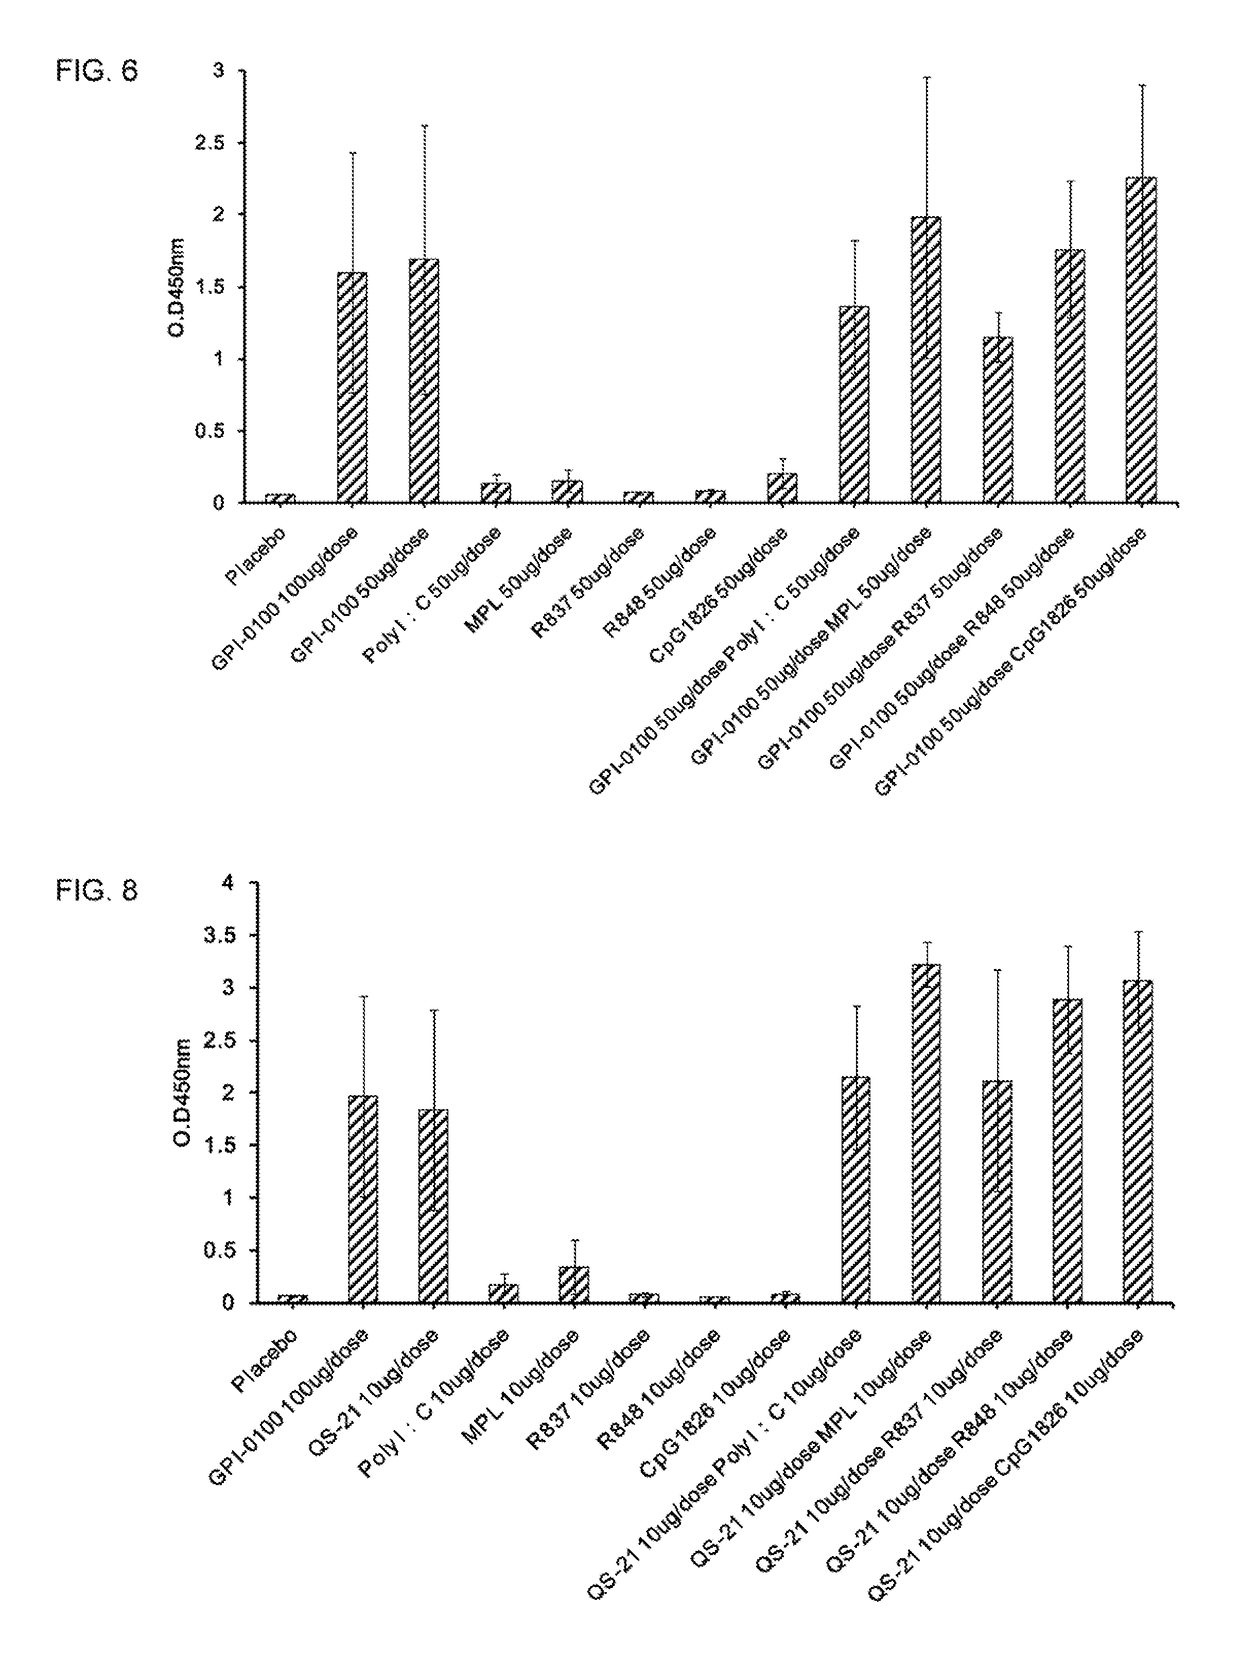 Vaccine composition comprising an immunogenic protein and combination adjuvants for use in eliciting antigen-specific T-cell responses